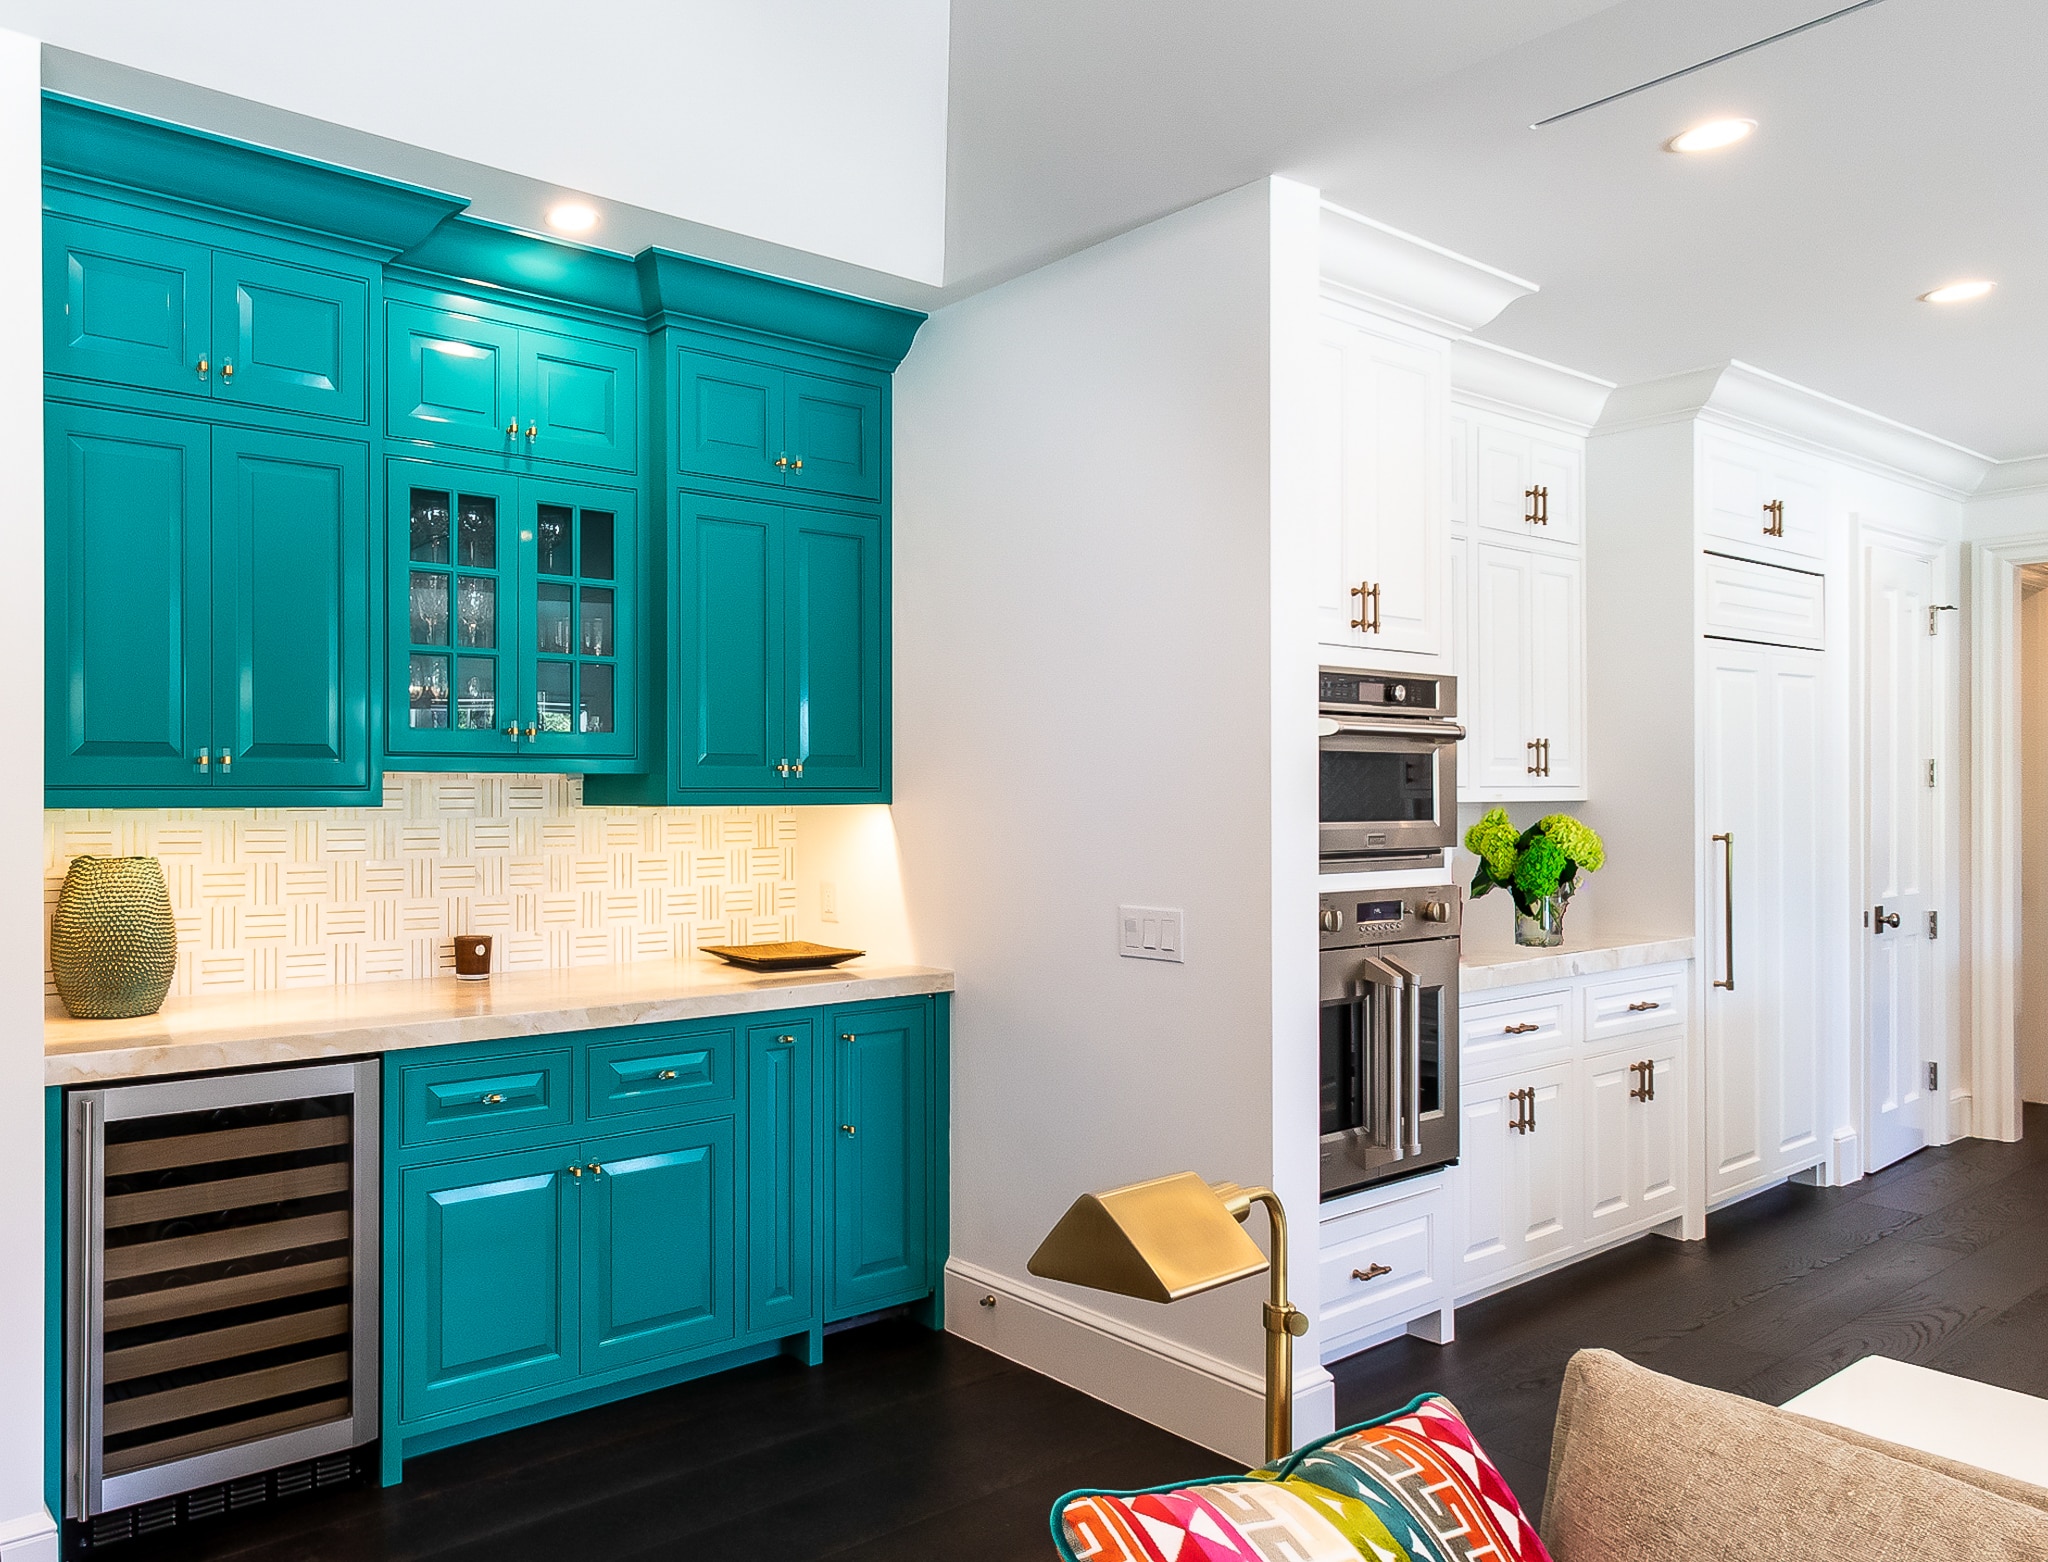 Teal and white cabinets